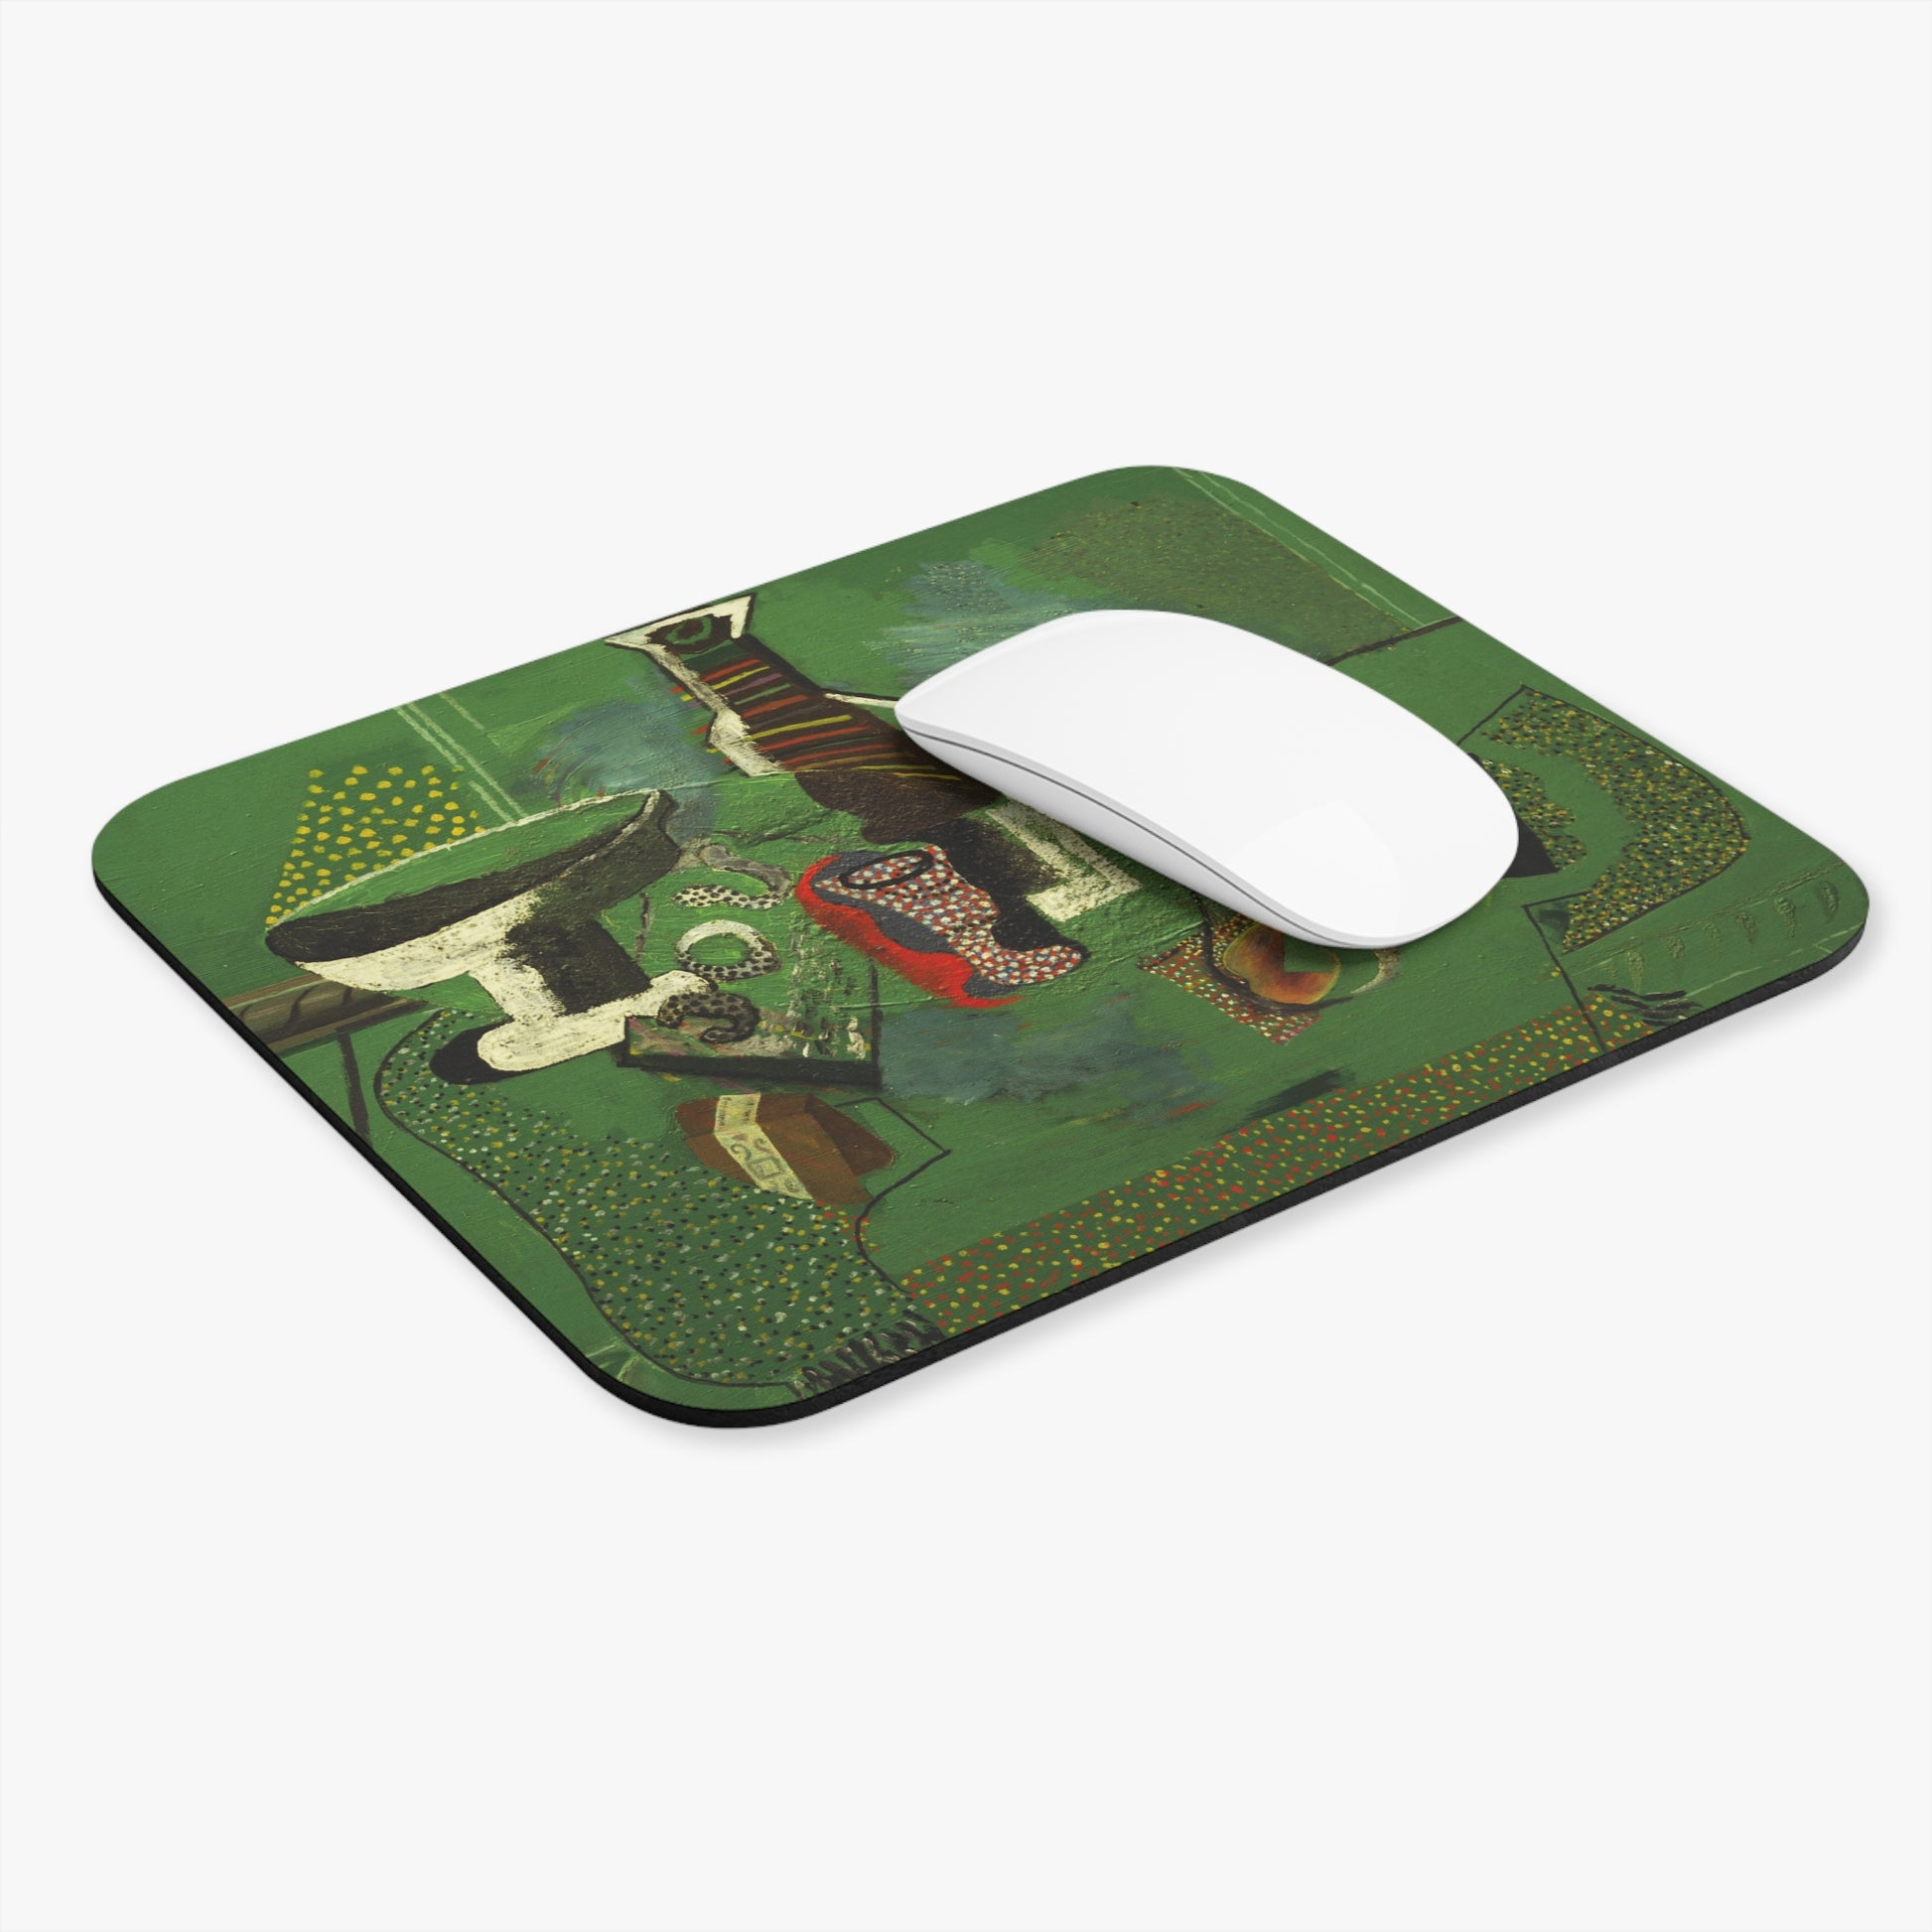 PABLO PICASSO - GREEN STILL LIFE - ART MOUSE PAD